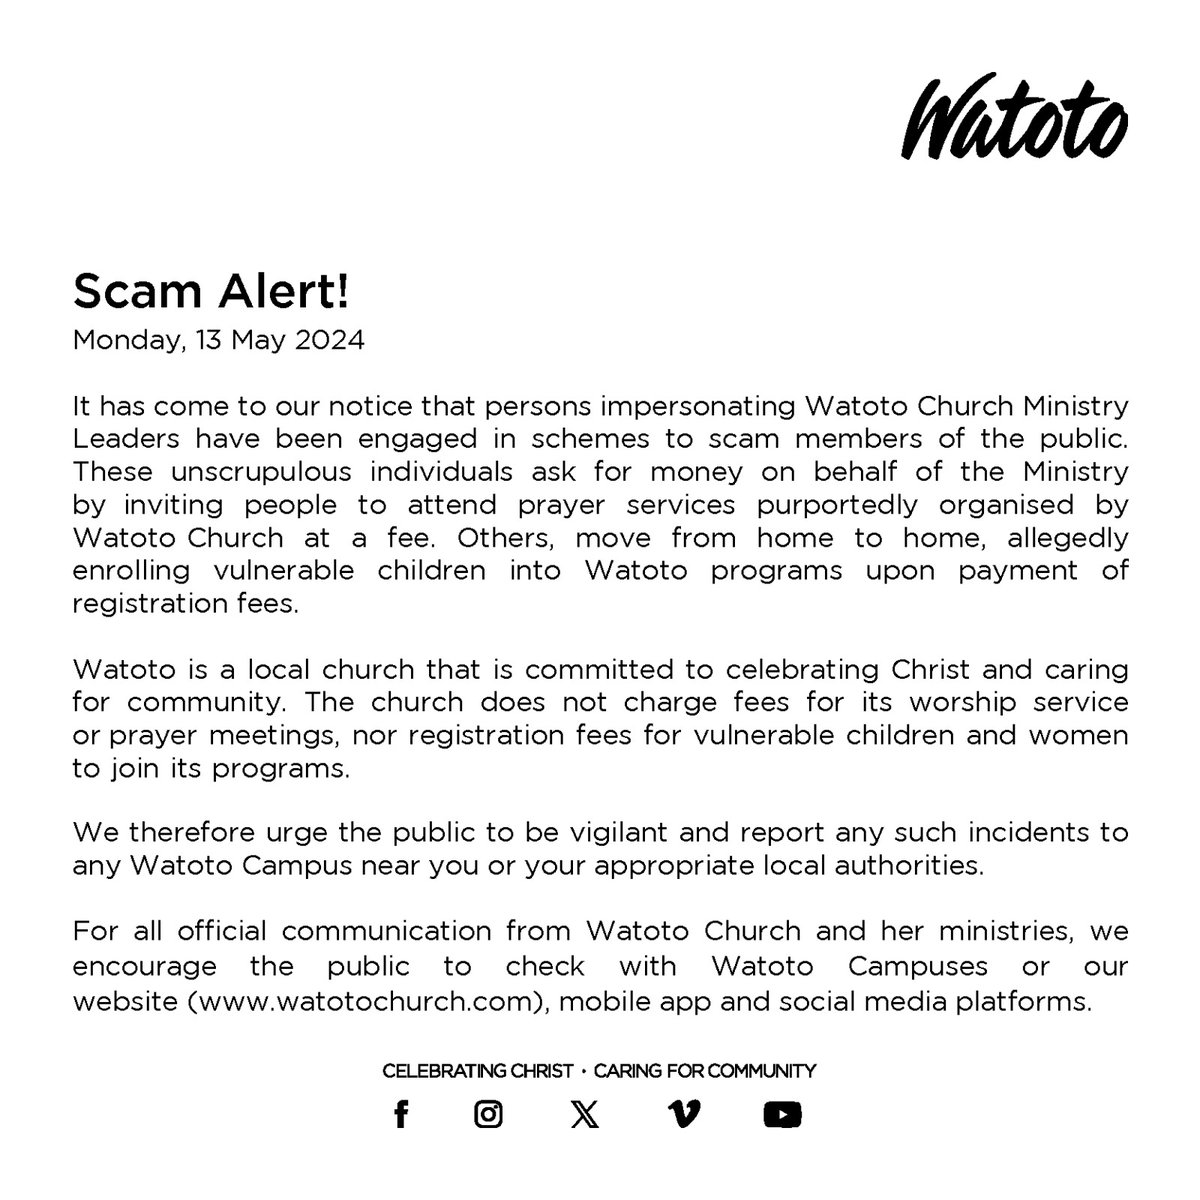 SCAM ALERT
It has come to our notice that persons impersonating Watoto Church Ministry
Leaders have been engaged in schemes to scam members of the public.

We urge the public to be vigilant and report any such incidents to
a Watoto Campus near you or your appropriate local…